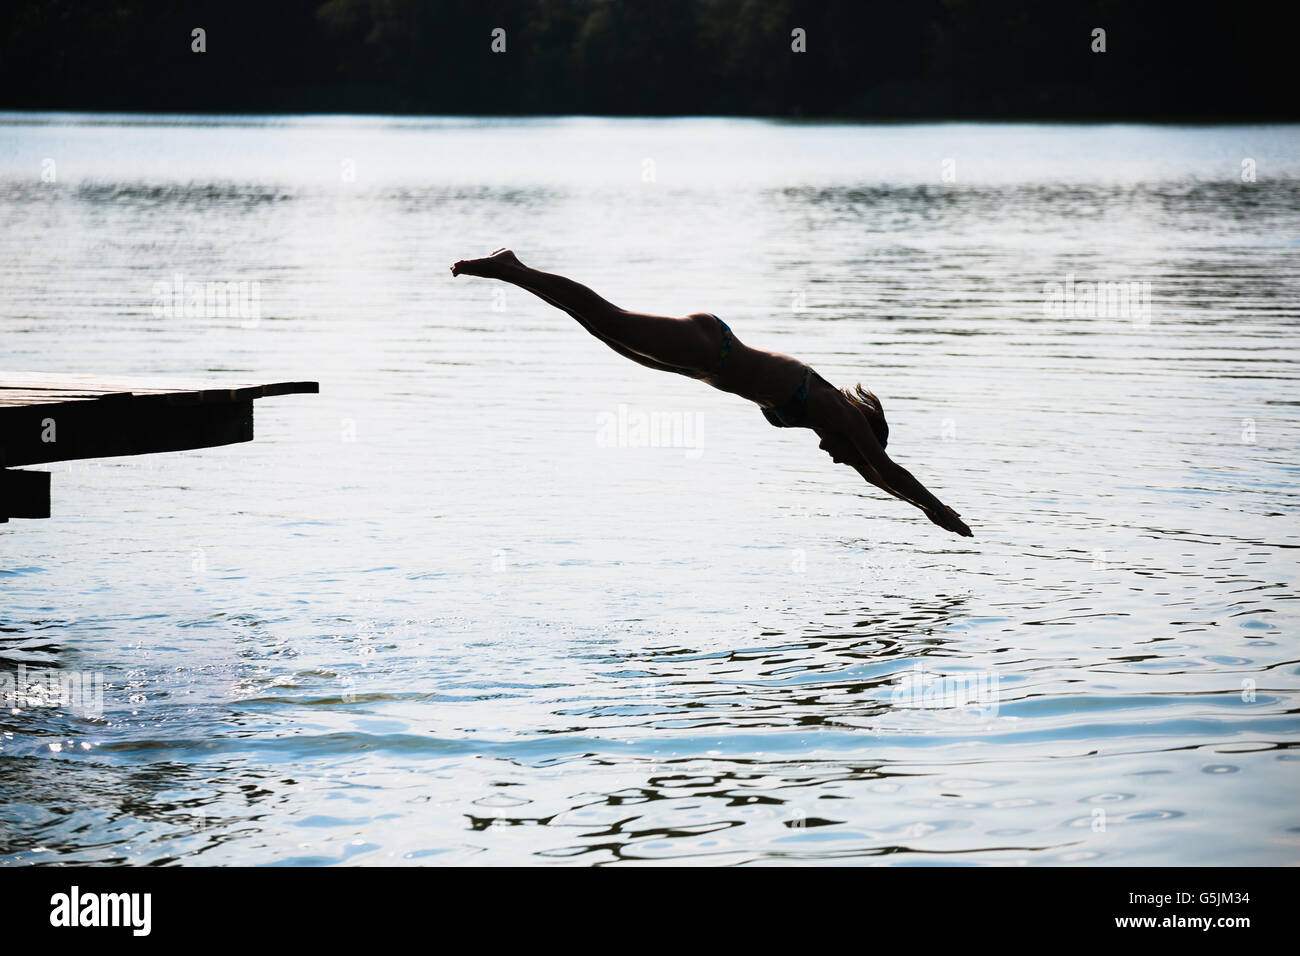 woman jumping into the lake Stock Photo